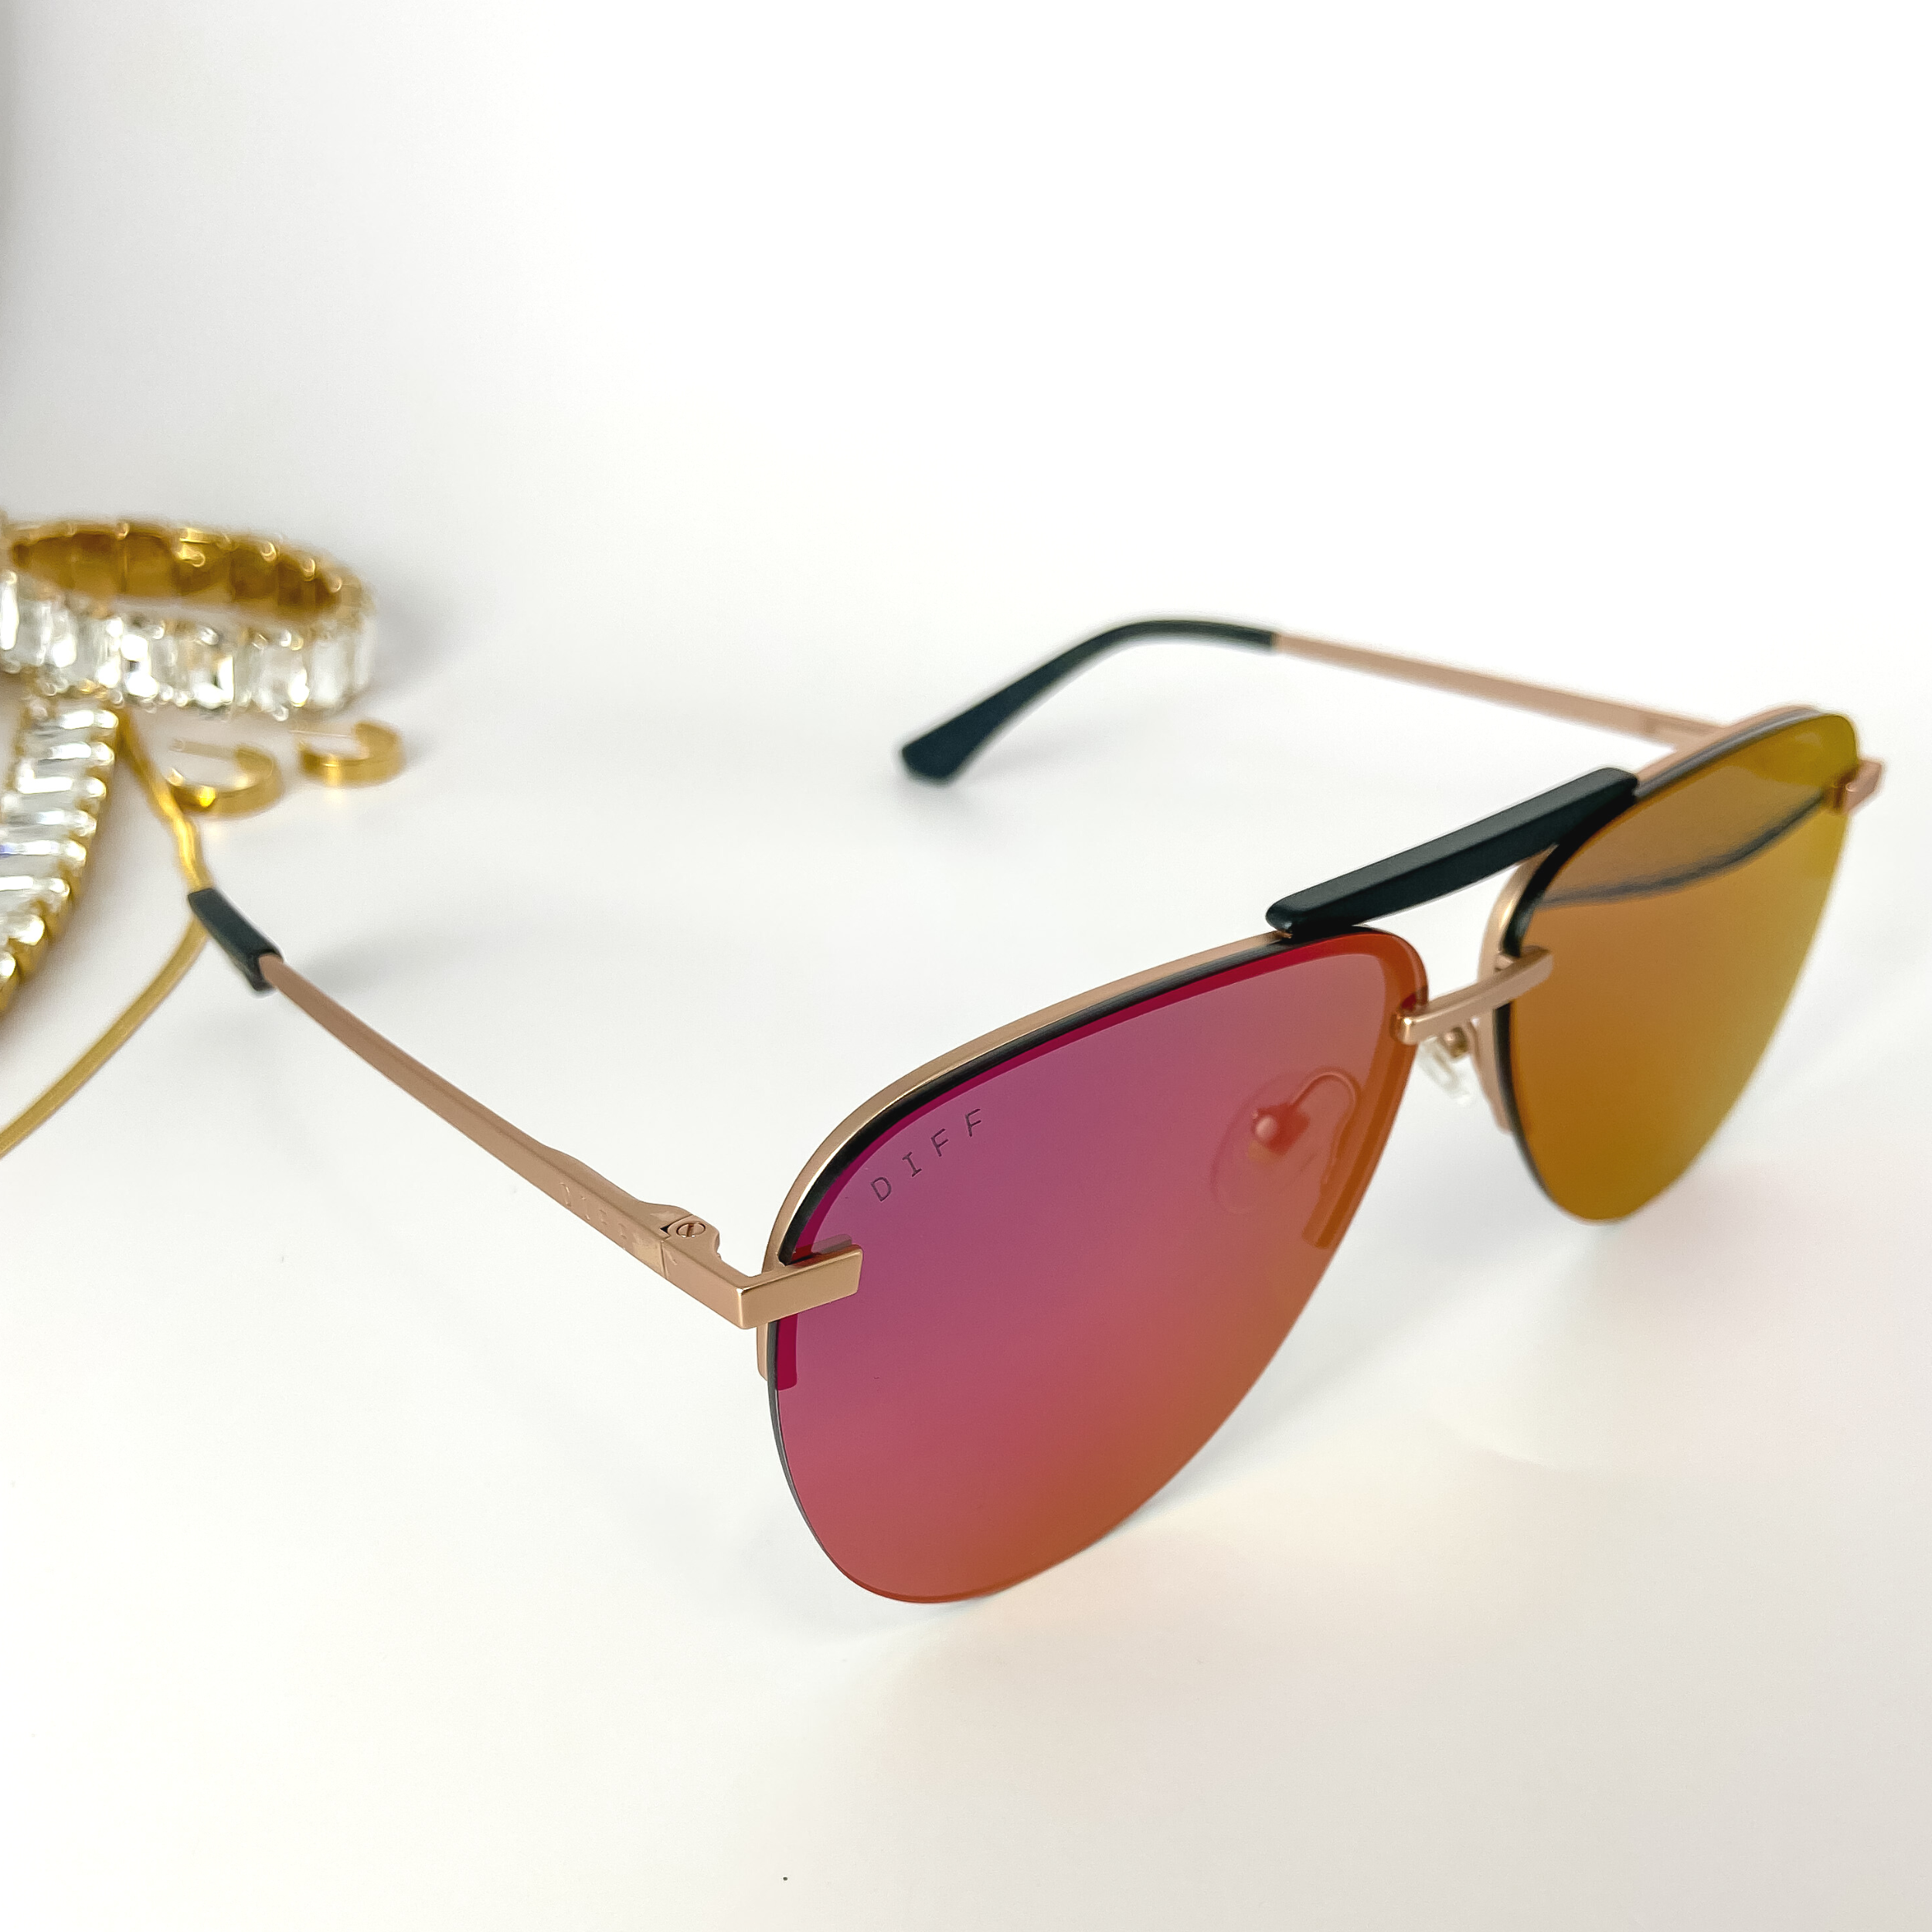 A pair of pink lens aviator sunglasses with gold-tone frames. These sunglasses are pictured on a white background with gold jewelry.